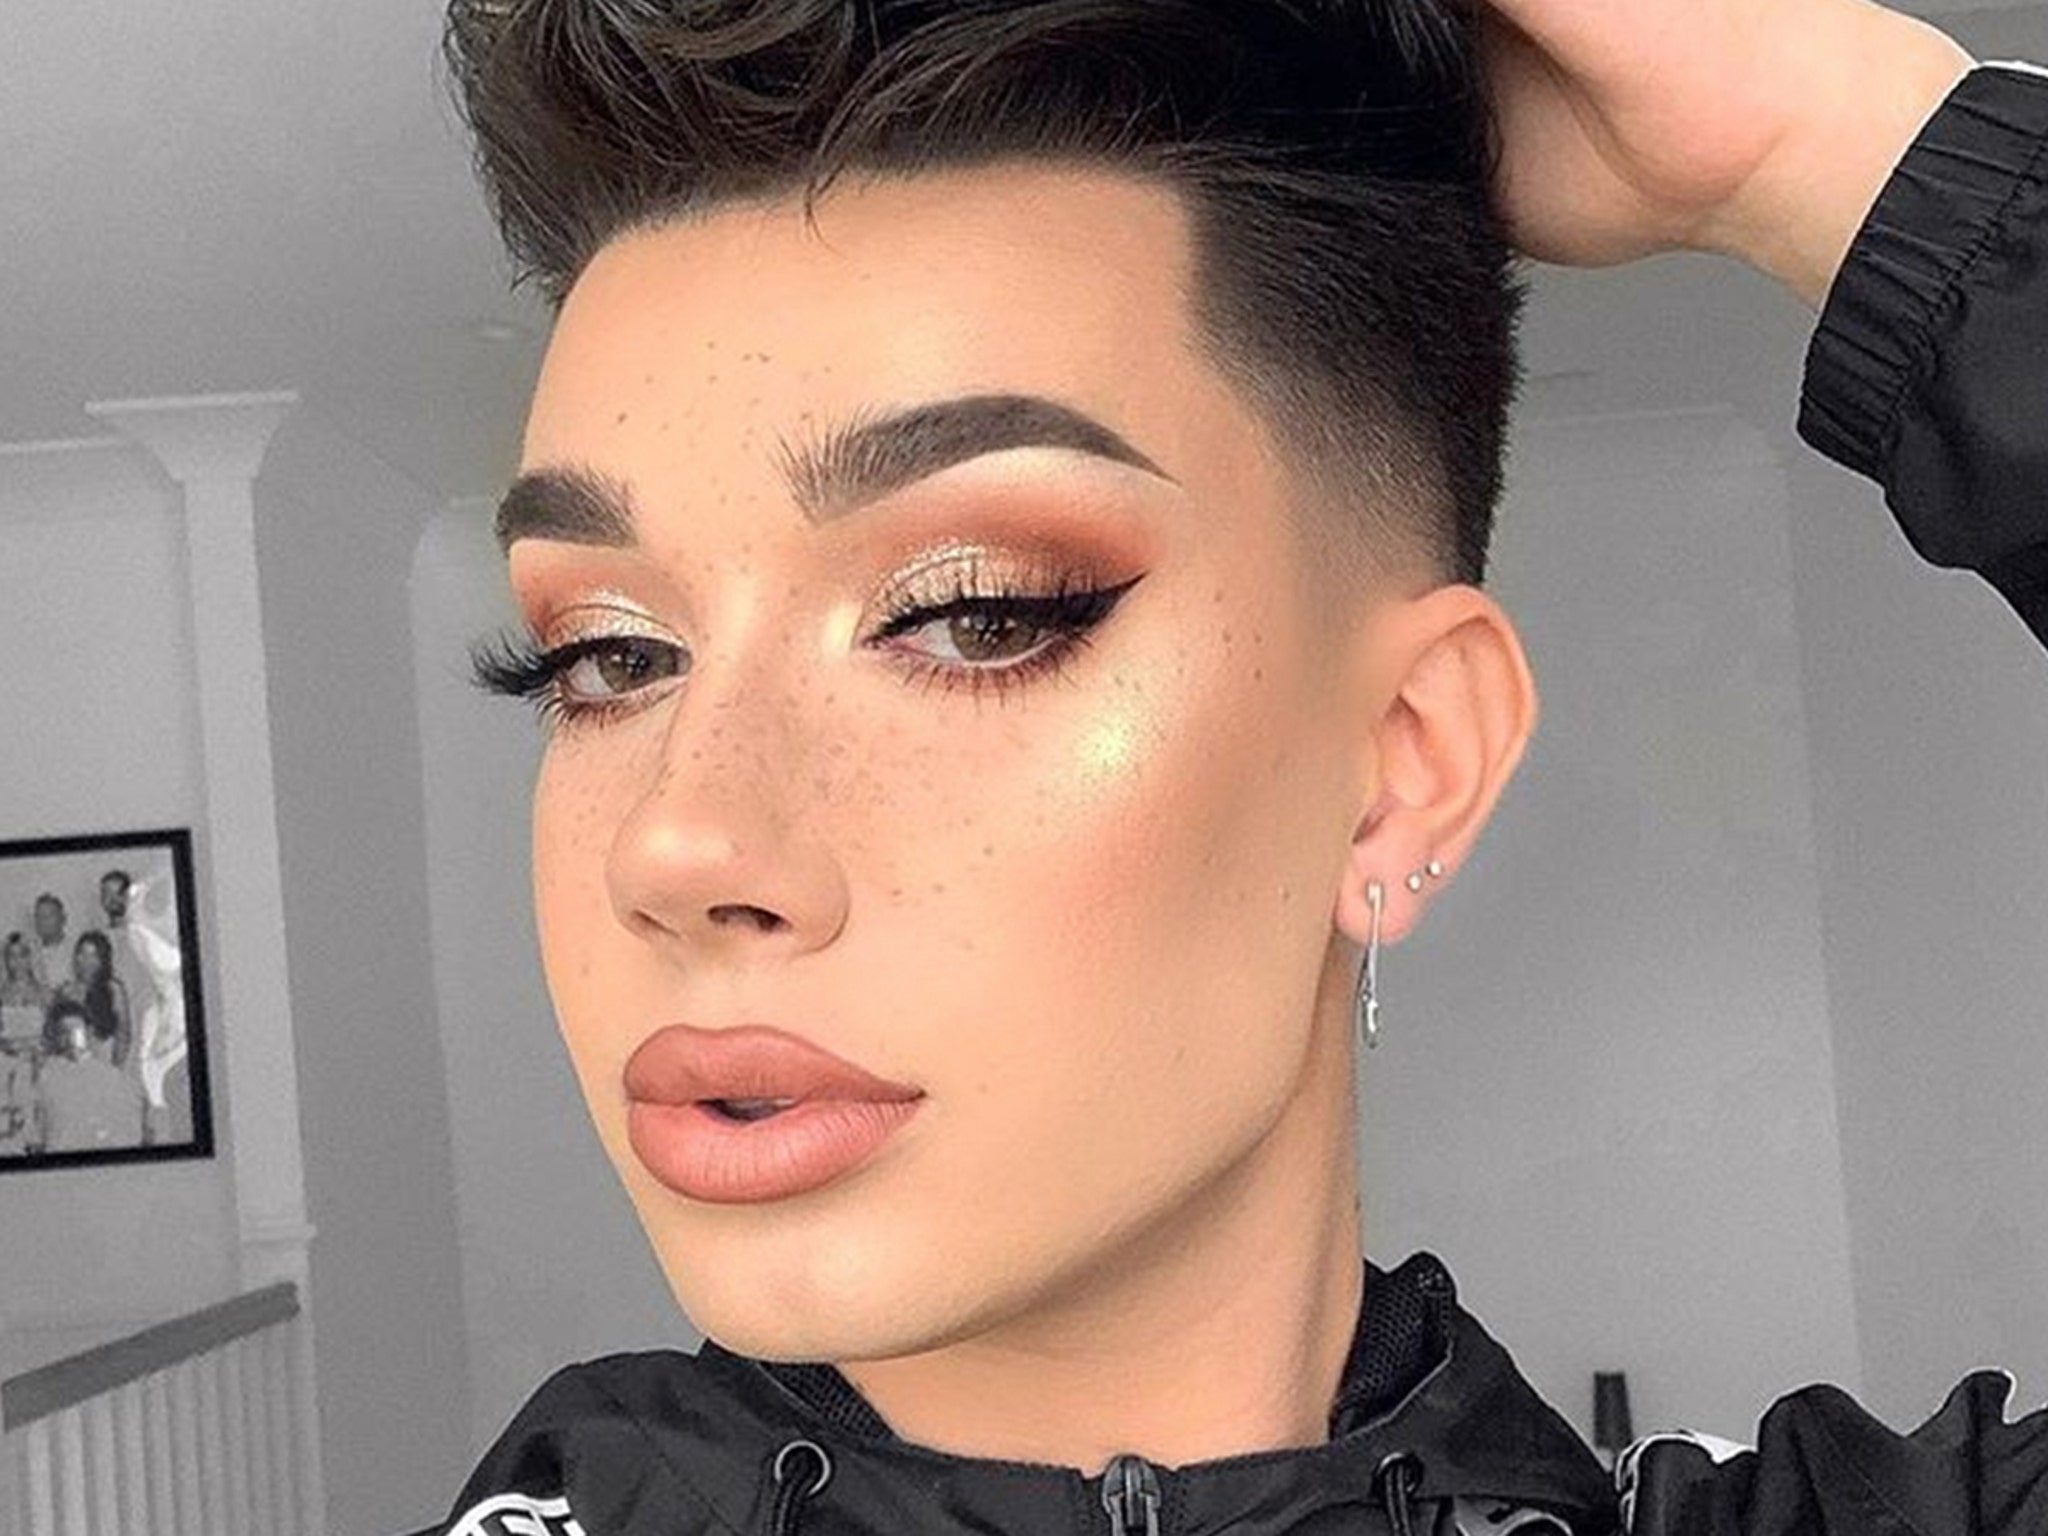 James Charles calls out Wet 'N Wild for “copying” his makeup